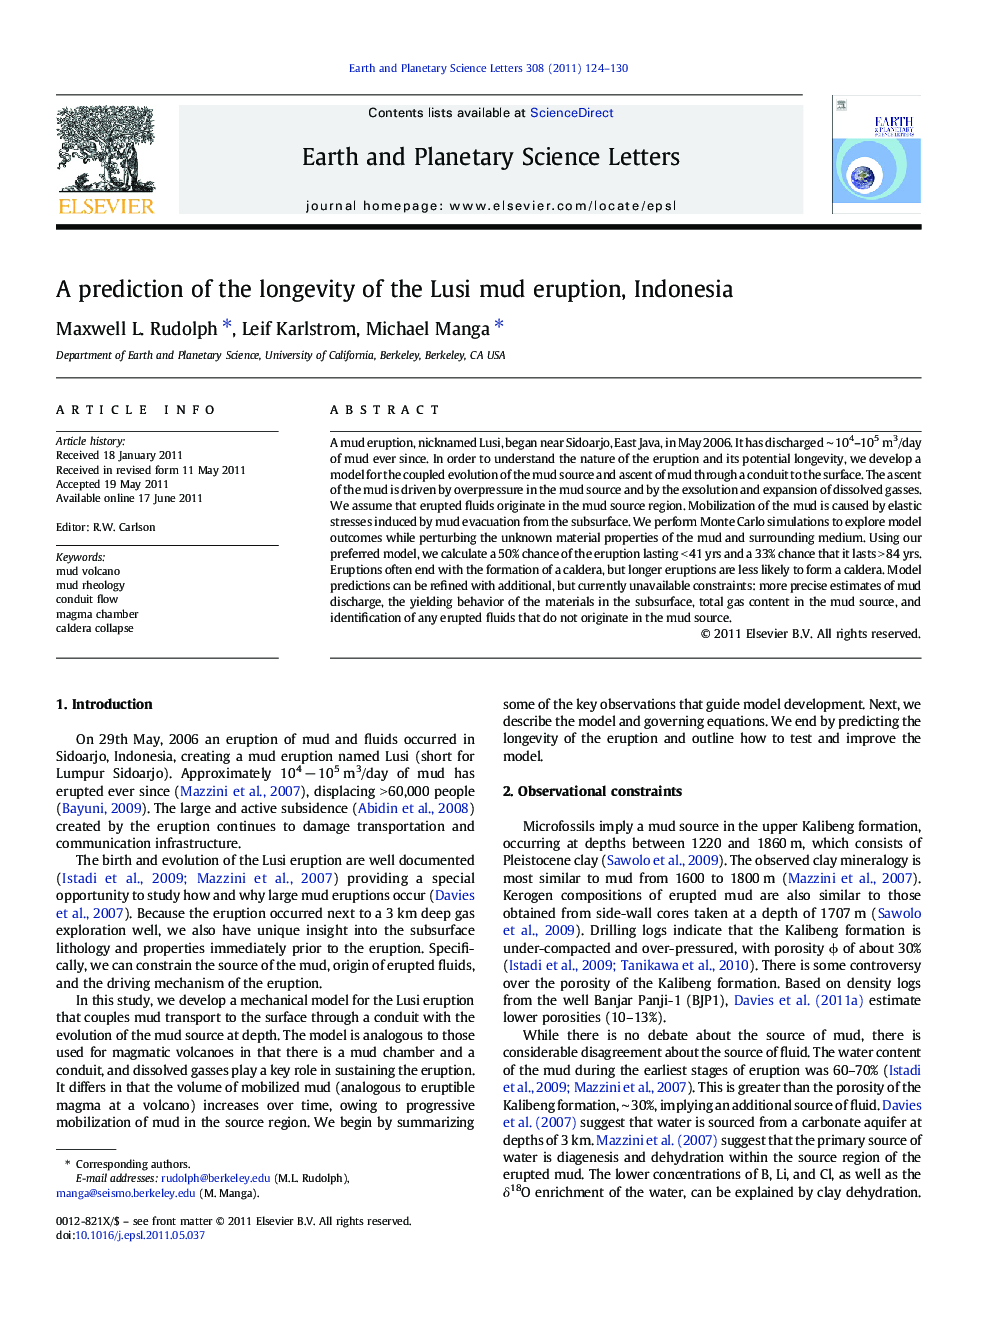 A prediction of the longevity of the Lusi mud eruption, Indonesia